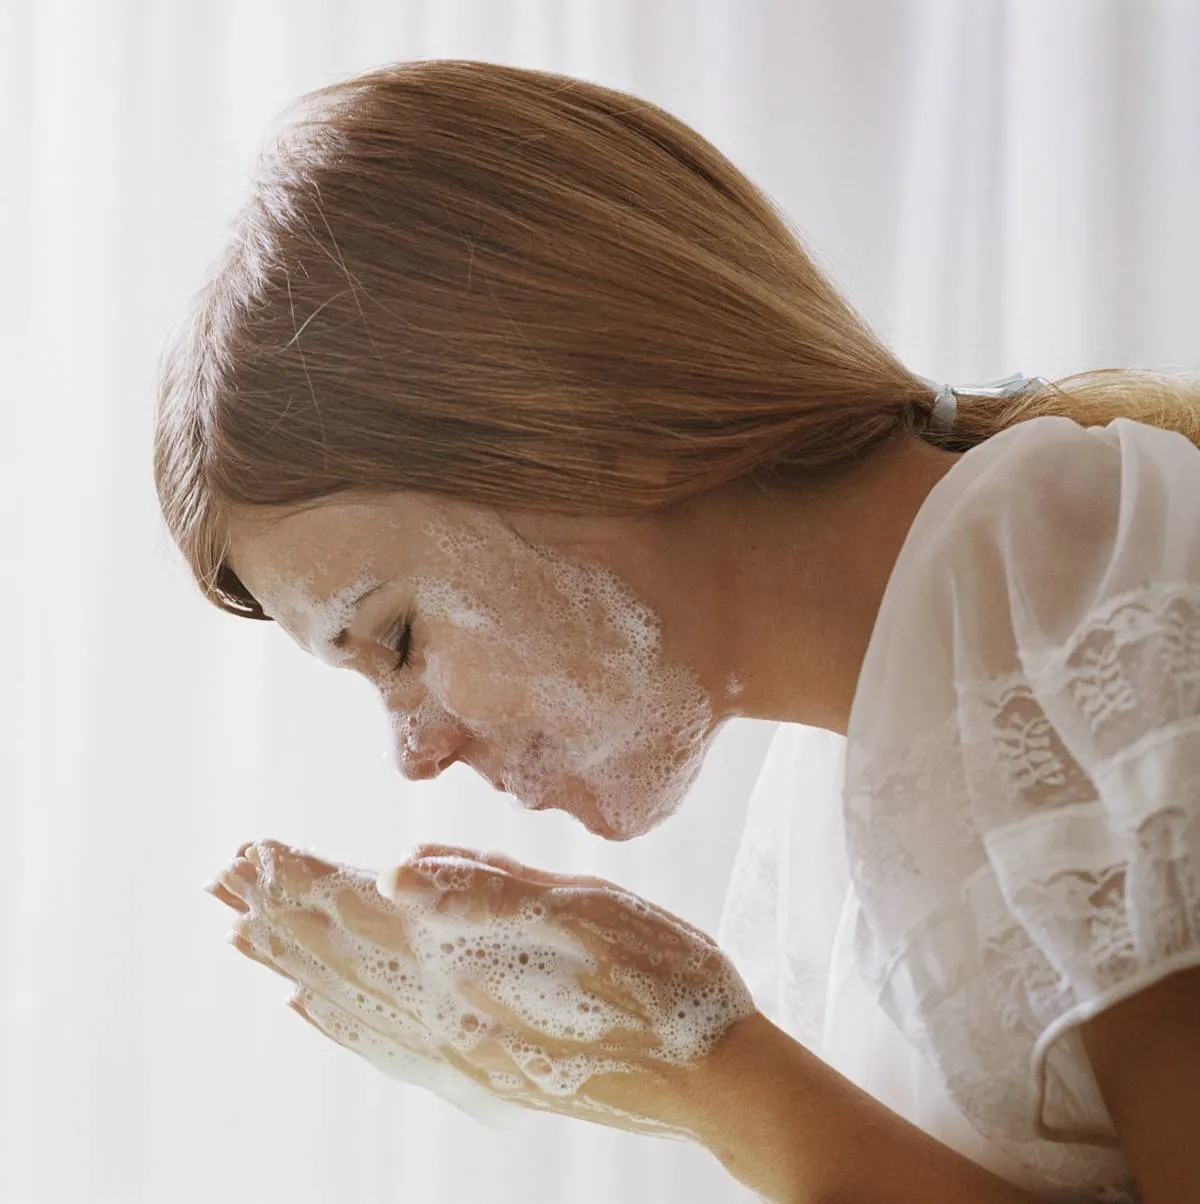 A woman washes her face with foaming soap.